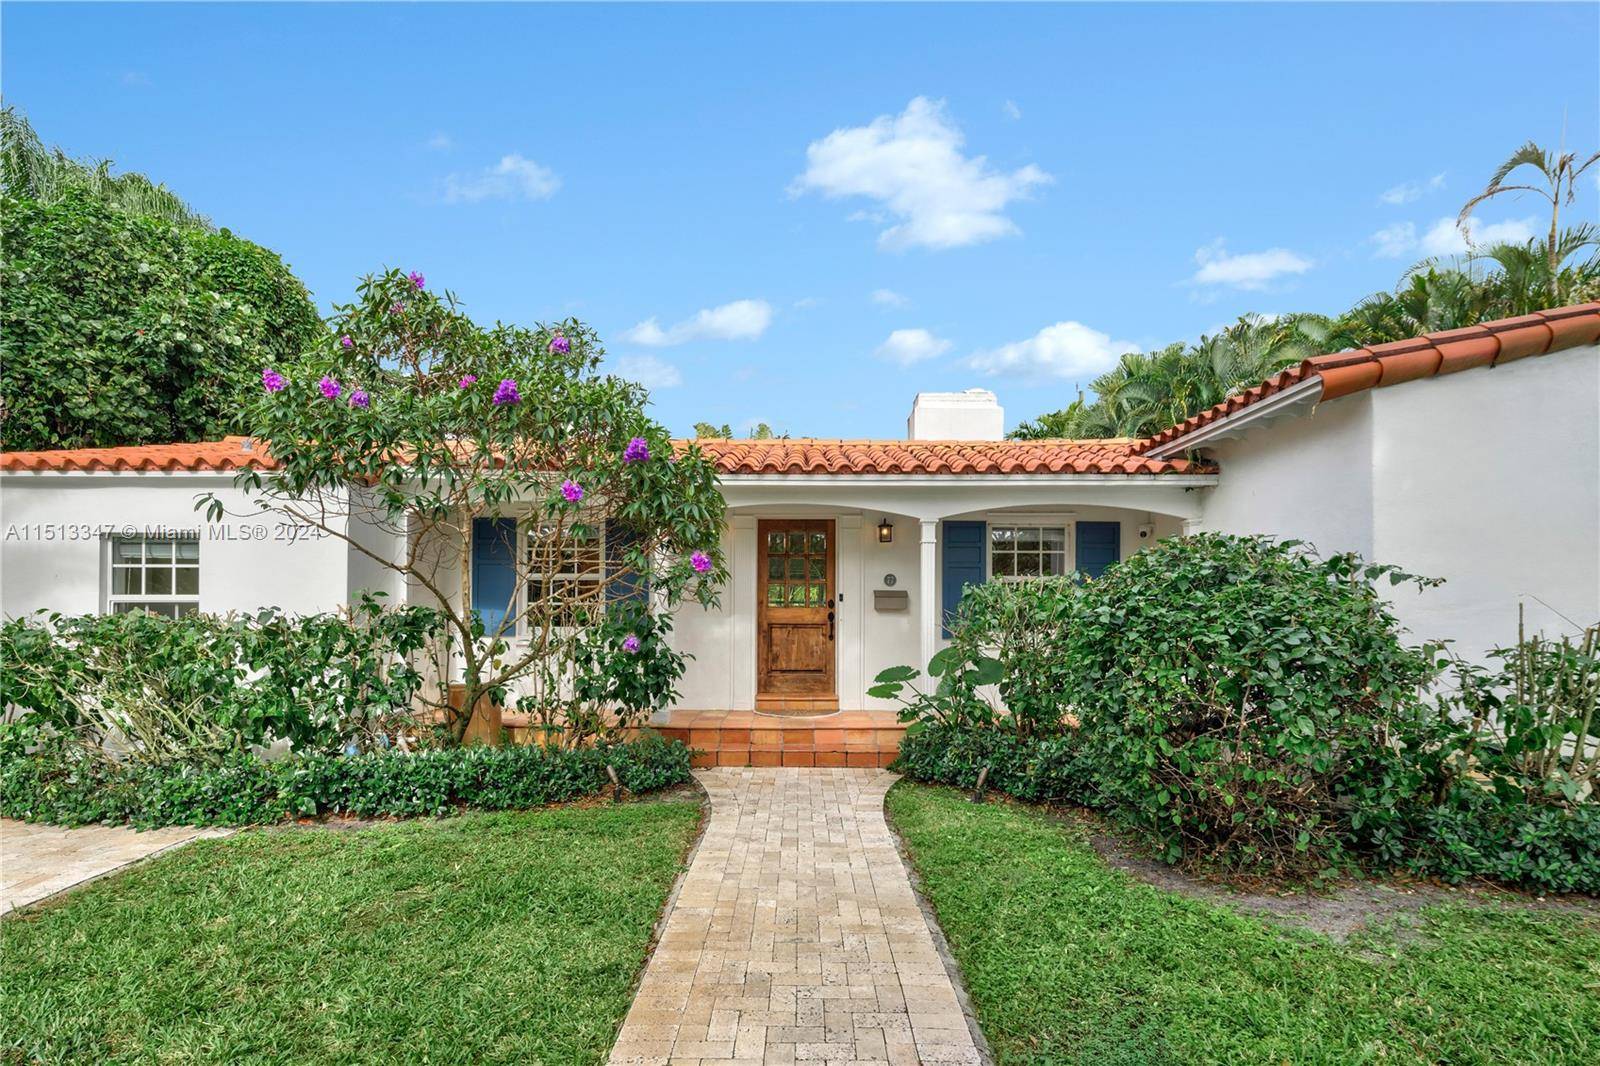 Miami Shores Gem, fully updated 1506 square foot home with 3 bedrooms and 2 bathrooms.